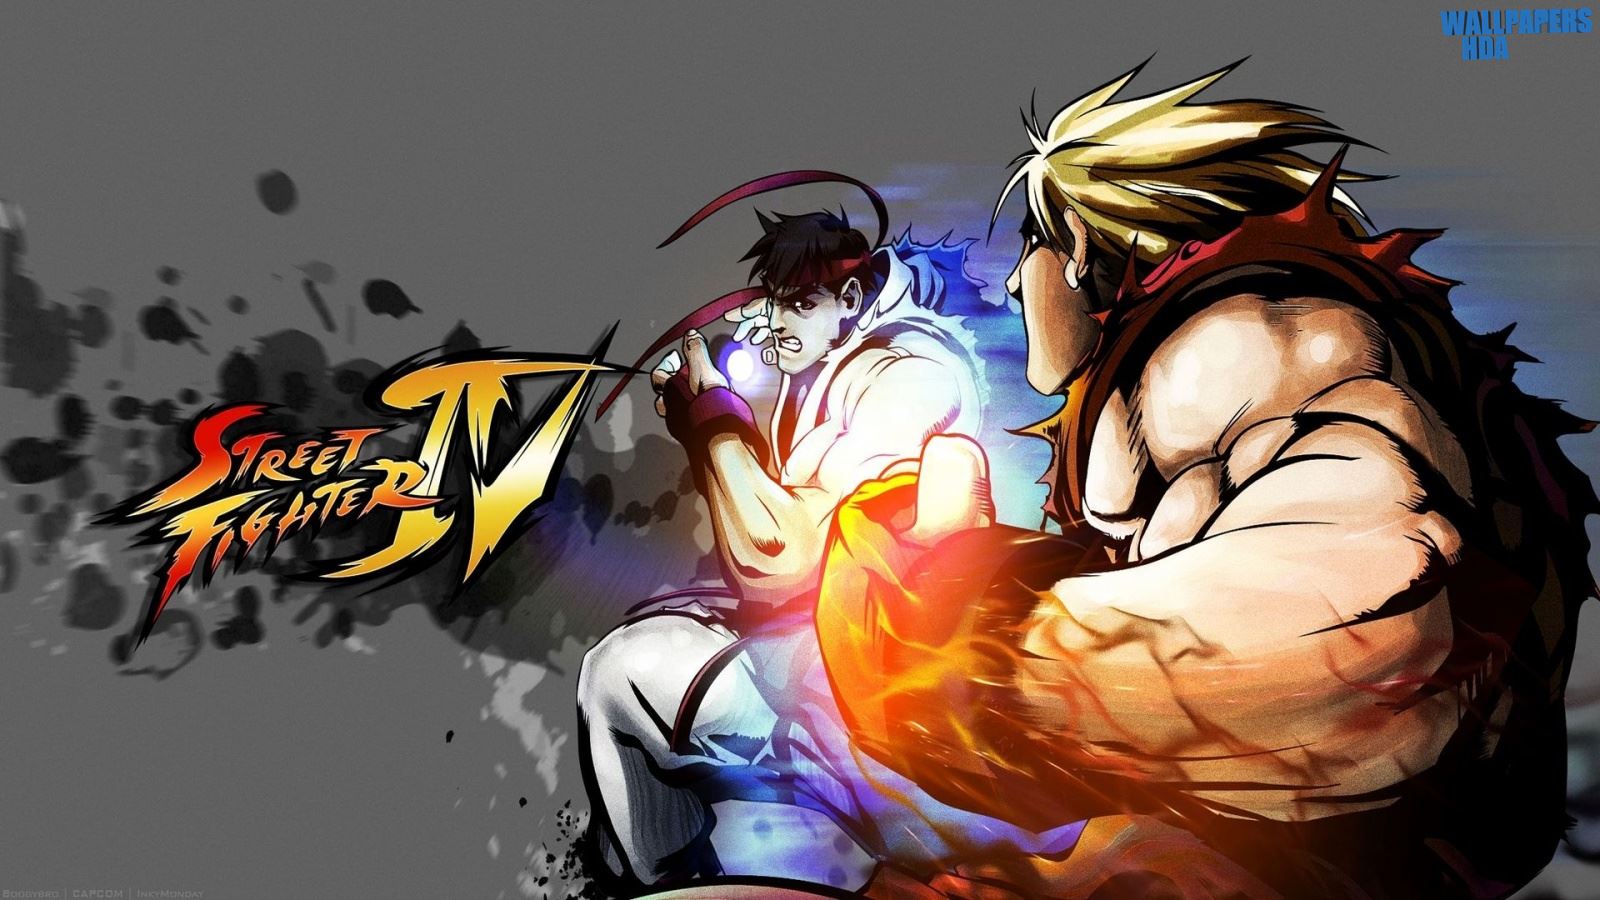 Street fighter iv game 1600x900